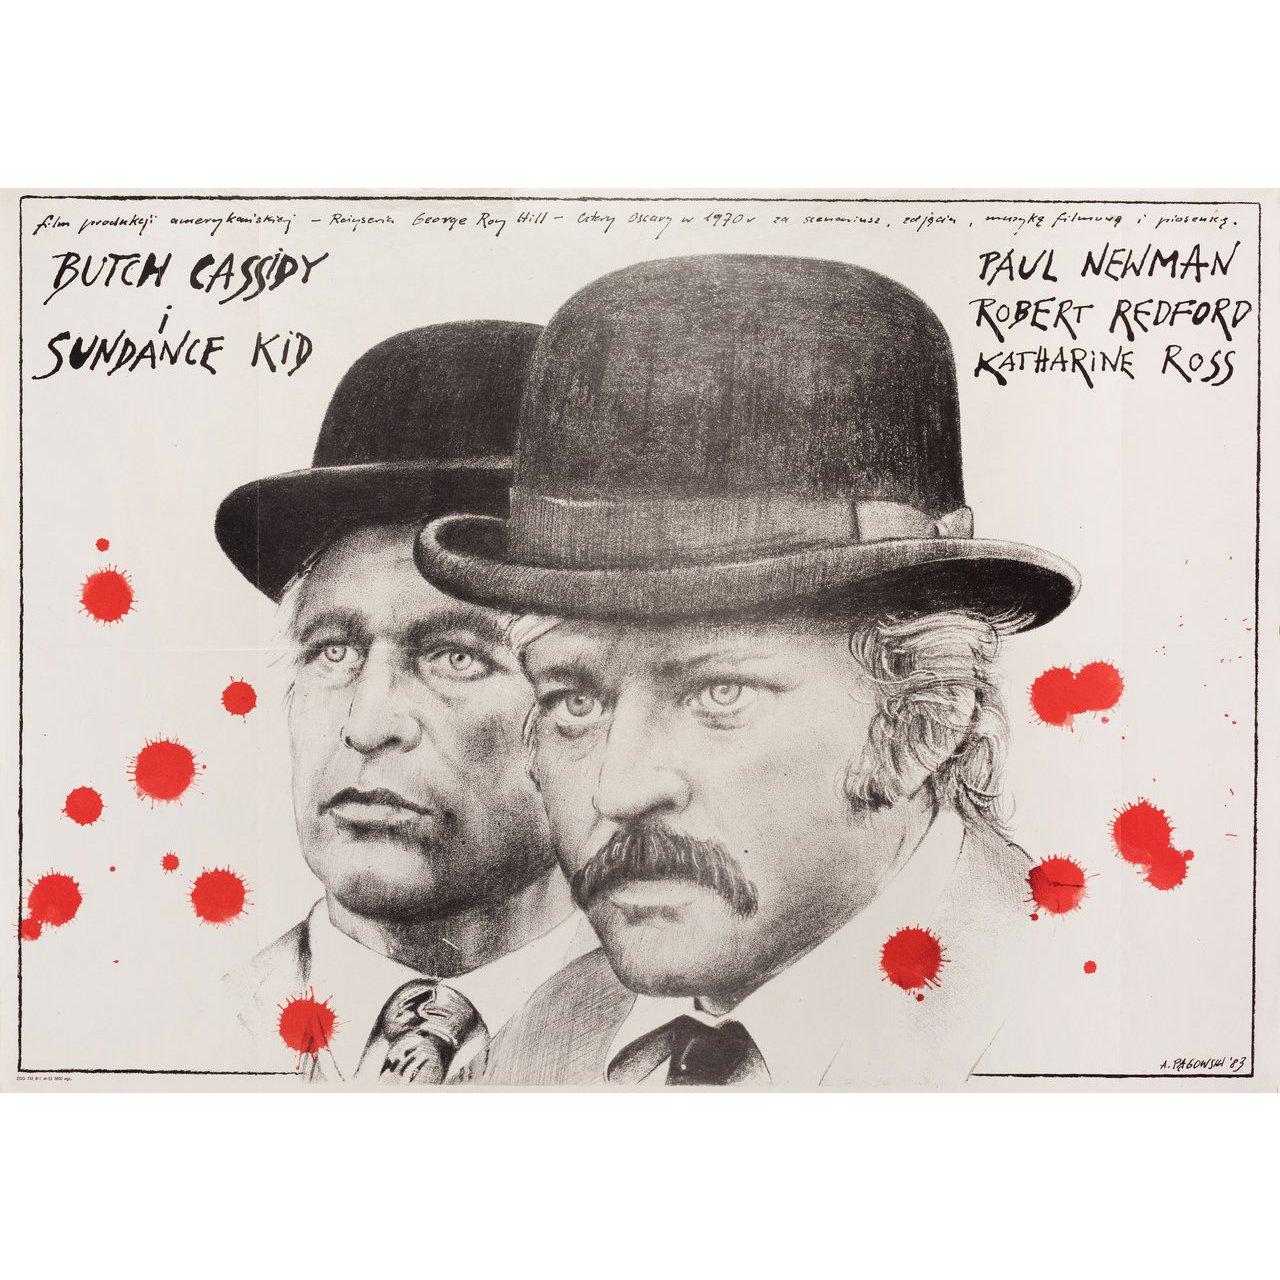 Original 1983 Polish B1 poster by Andrzej Pagowski for the first Polish theatrical release of the 1969 film Butch Cassidy and the Sundance Kid directed by George Roy Hill with Paul Newman / Robert Redford / Katharine Ross / Strother Martin. Very